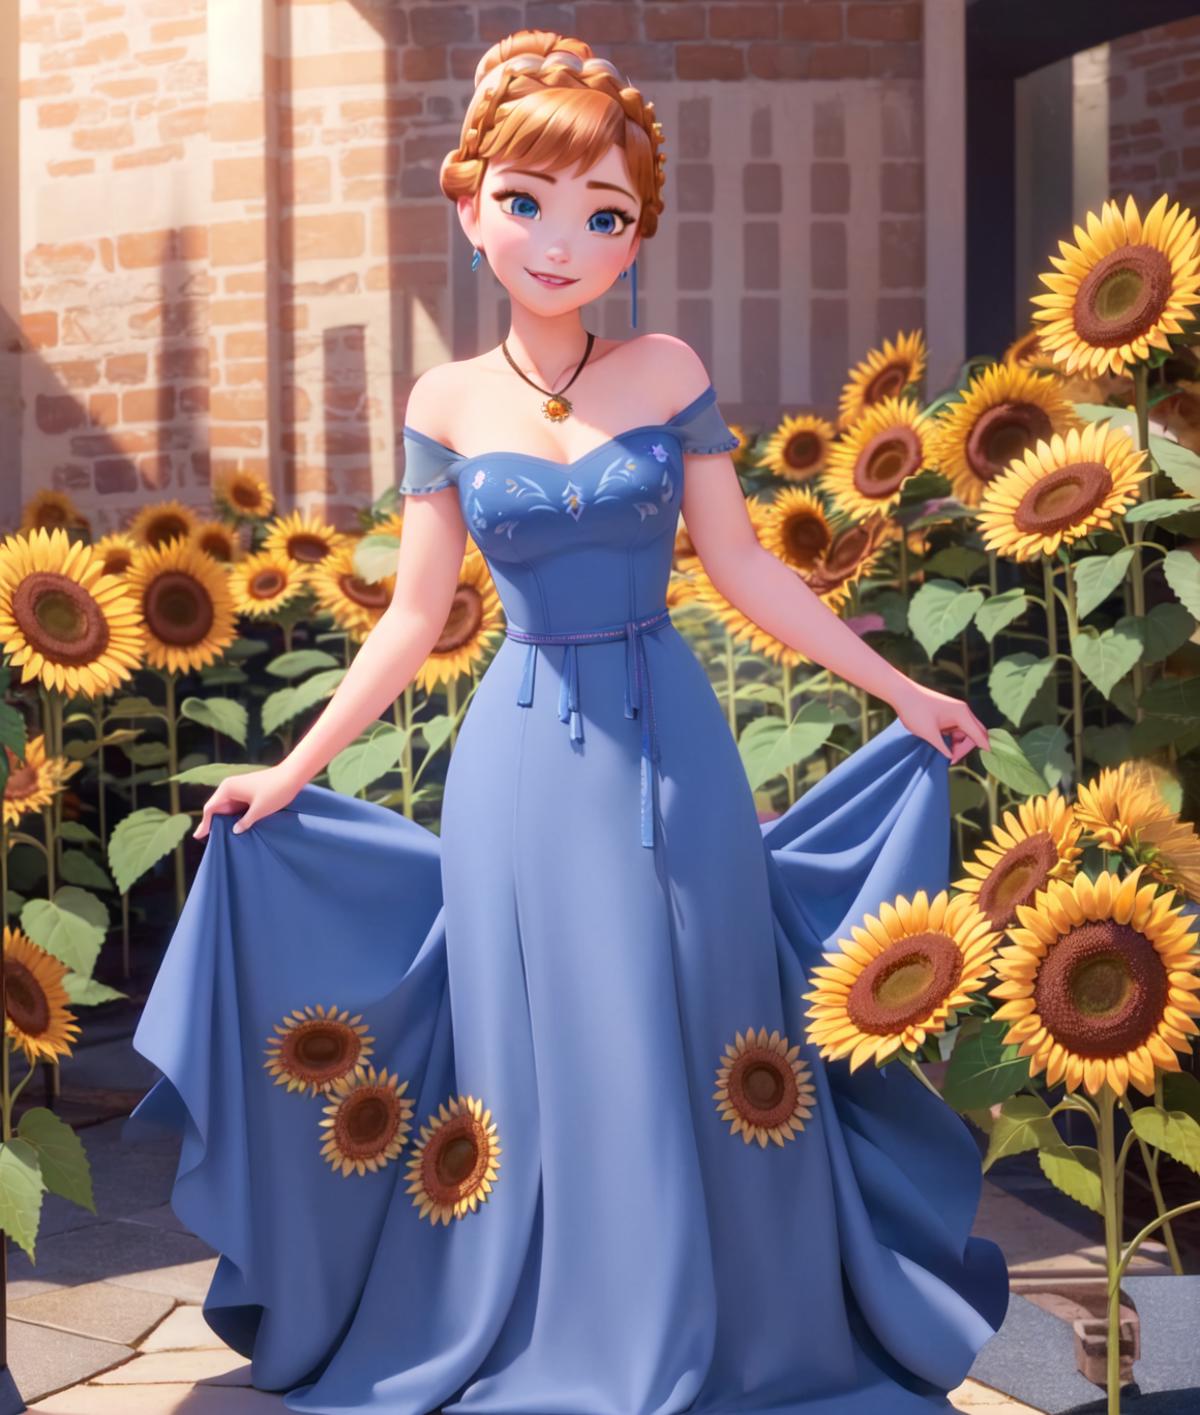 Frozen - Anna image by zxasqwedc402437